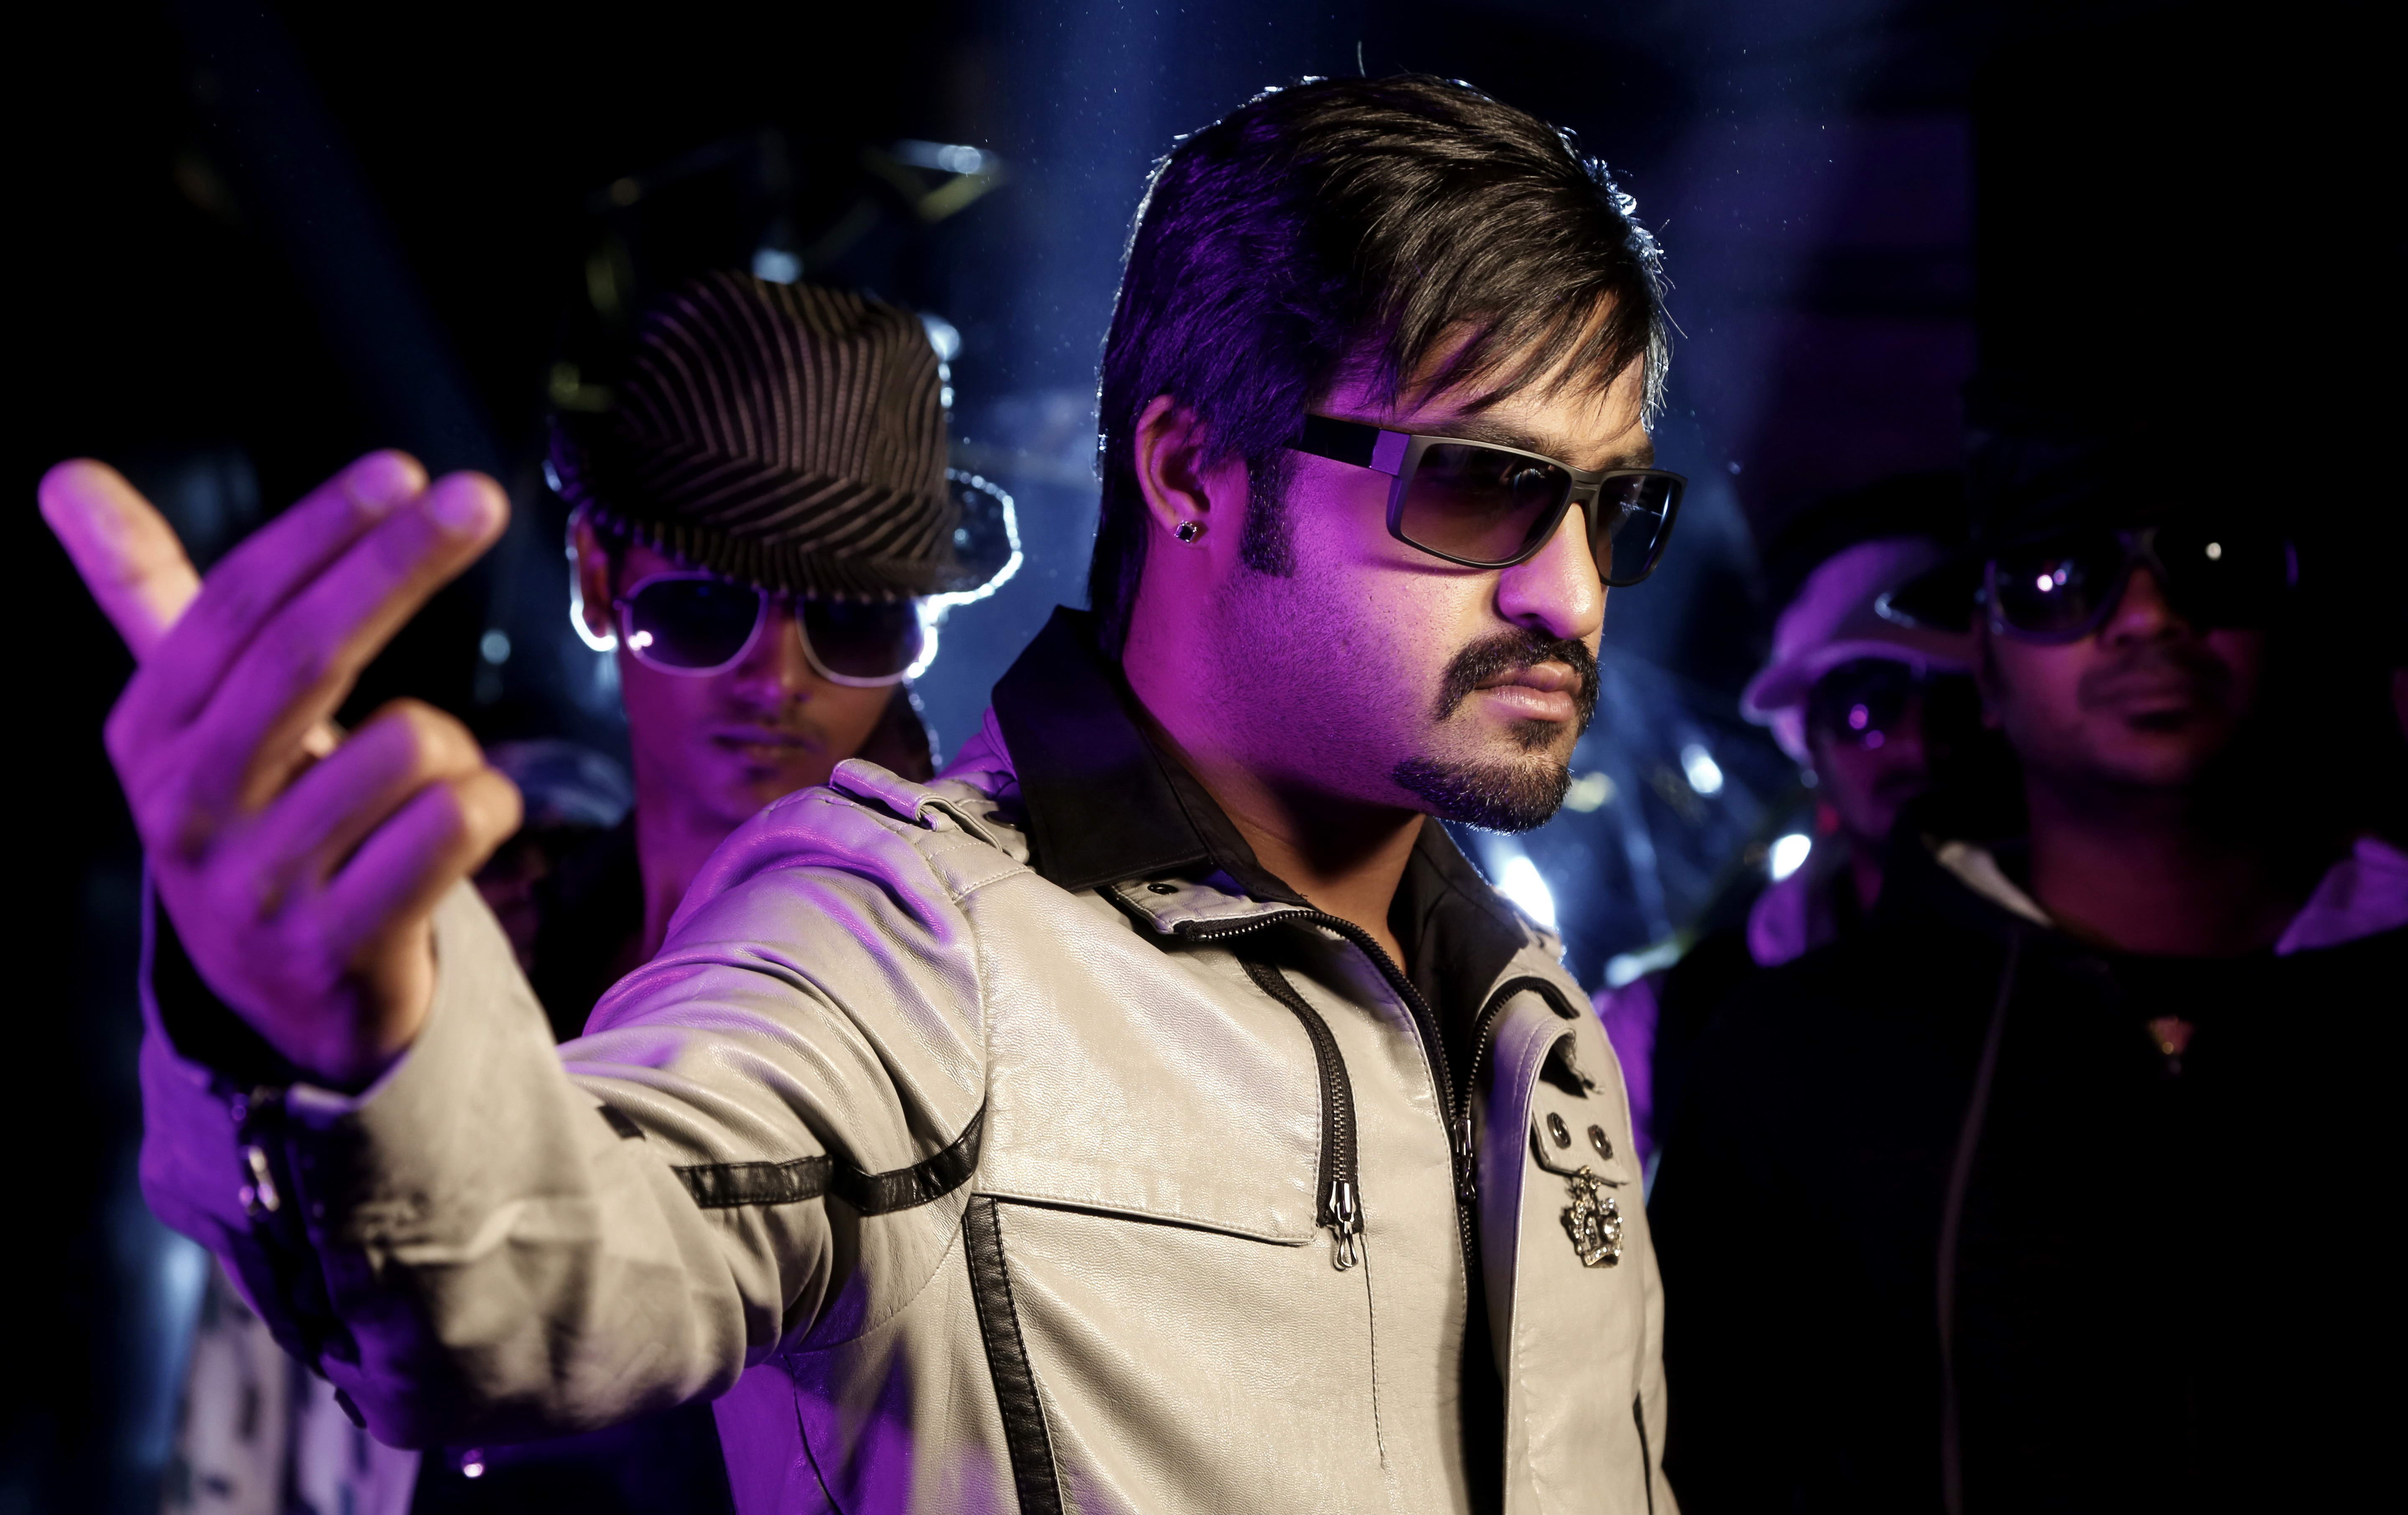 Jr. NTR - Baadshah Movie New Pictures | Picture 408058